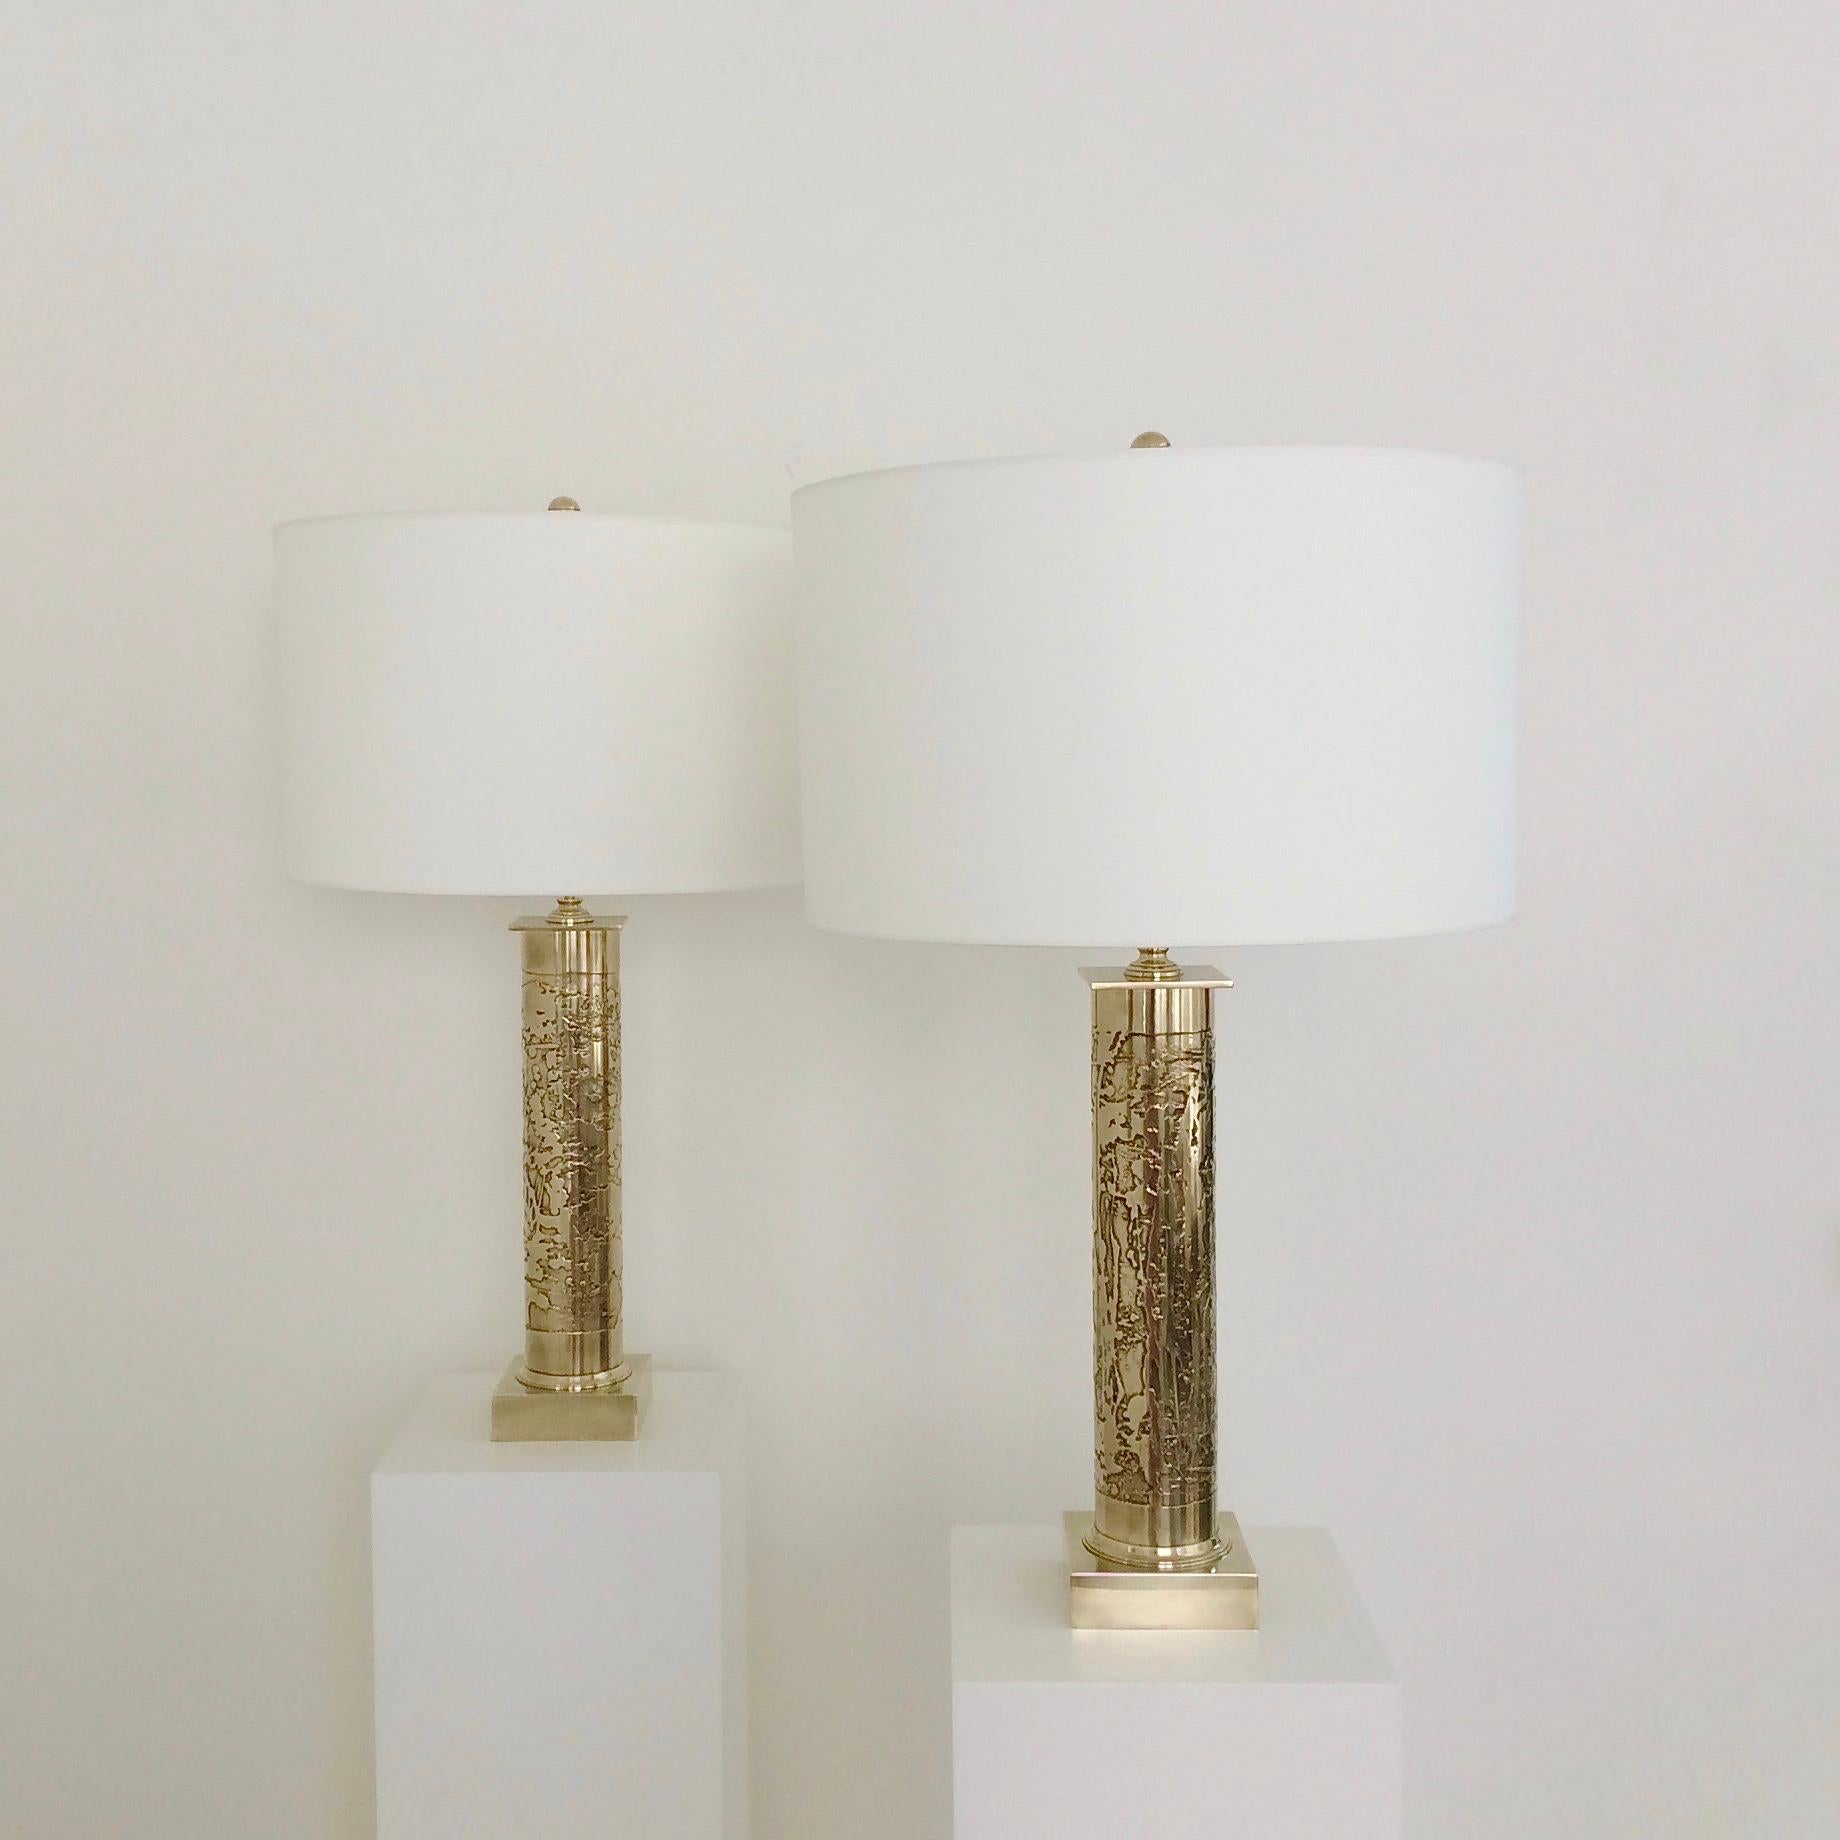 Mid-Century Modern Willy Daro Attributed Design Pair of Table Lamps, circa 1975, Belgium